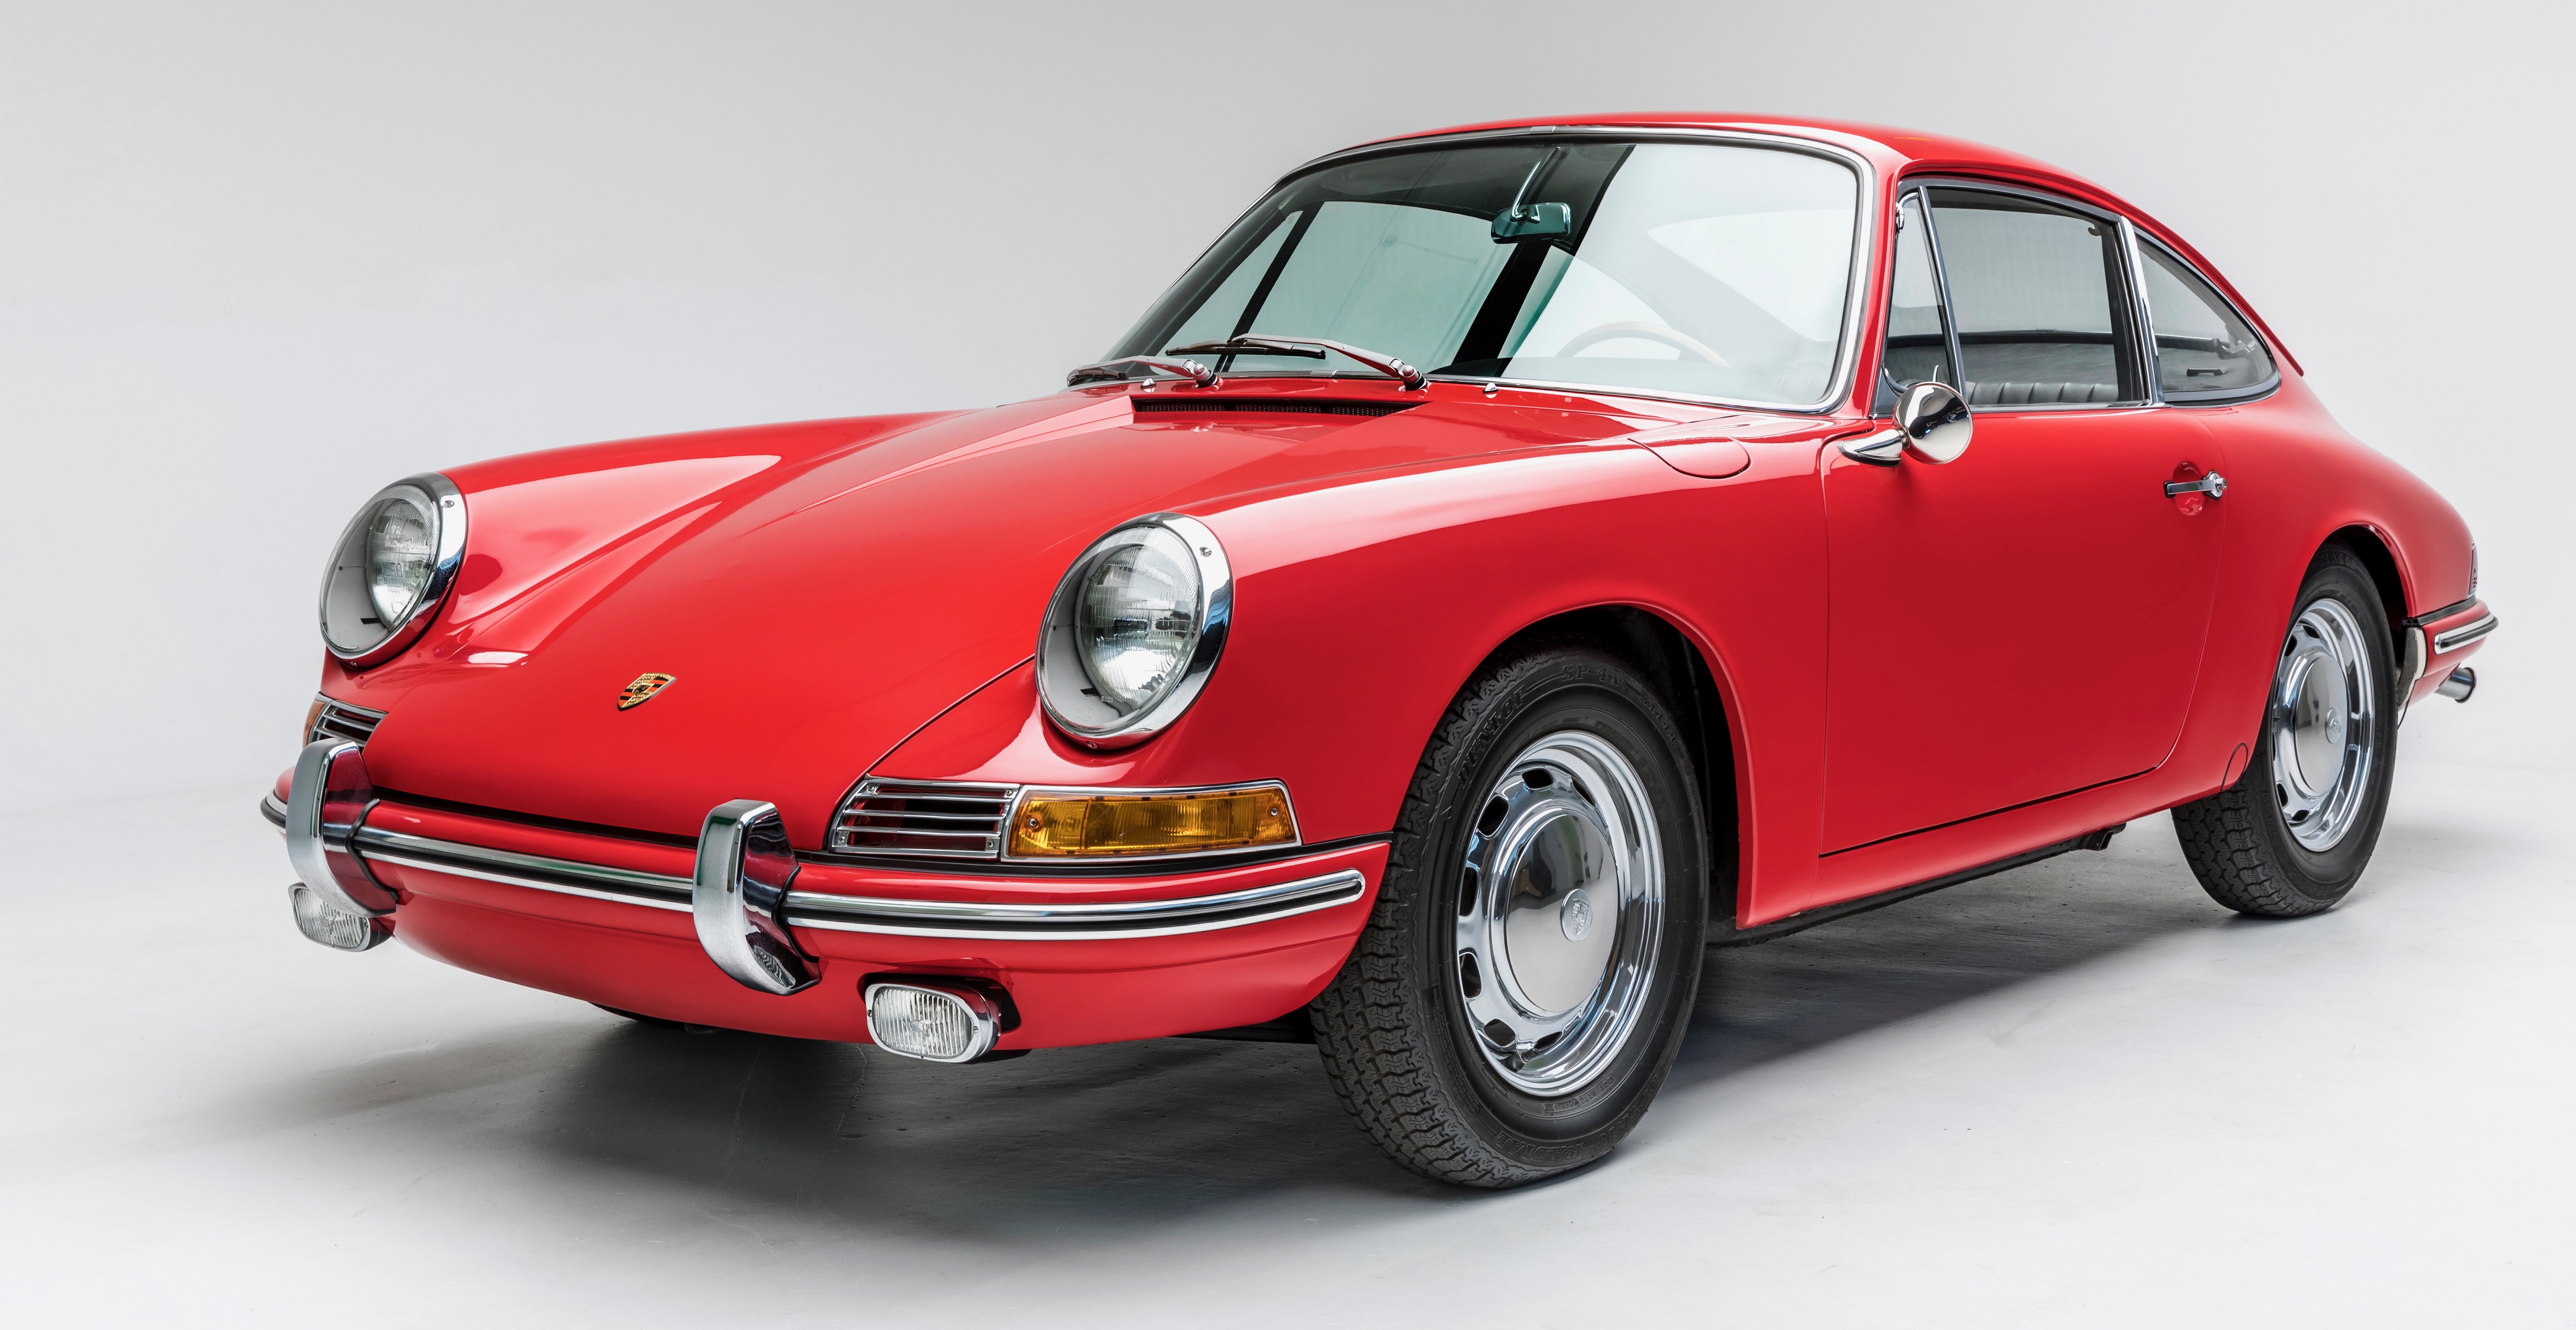 , Petersen’s Porsche exhibit to present 50 of the marque’s most iconic vehicles, ClassicCars.com Journal